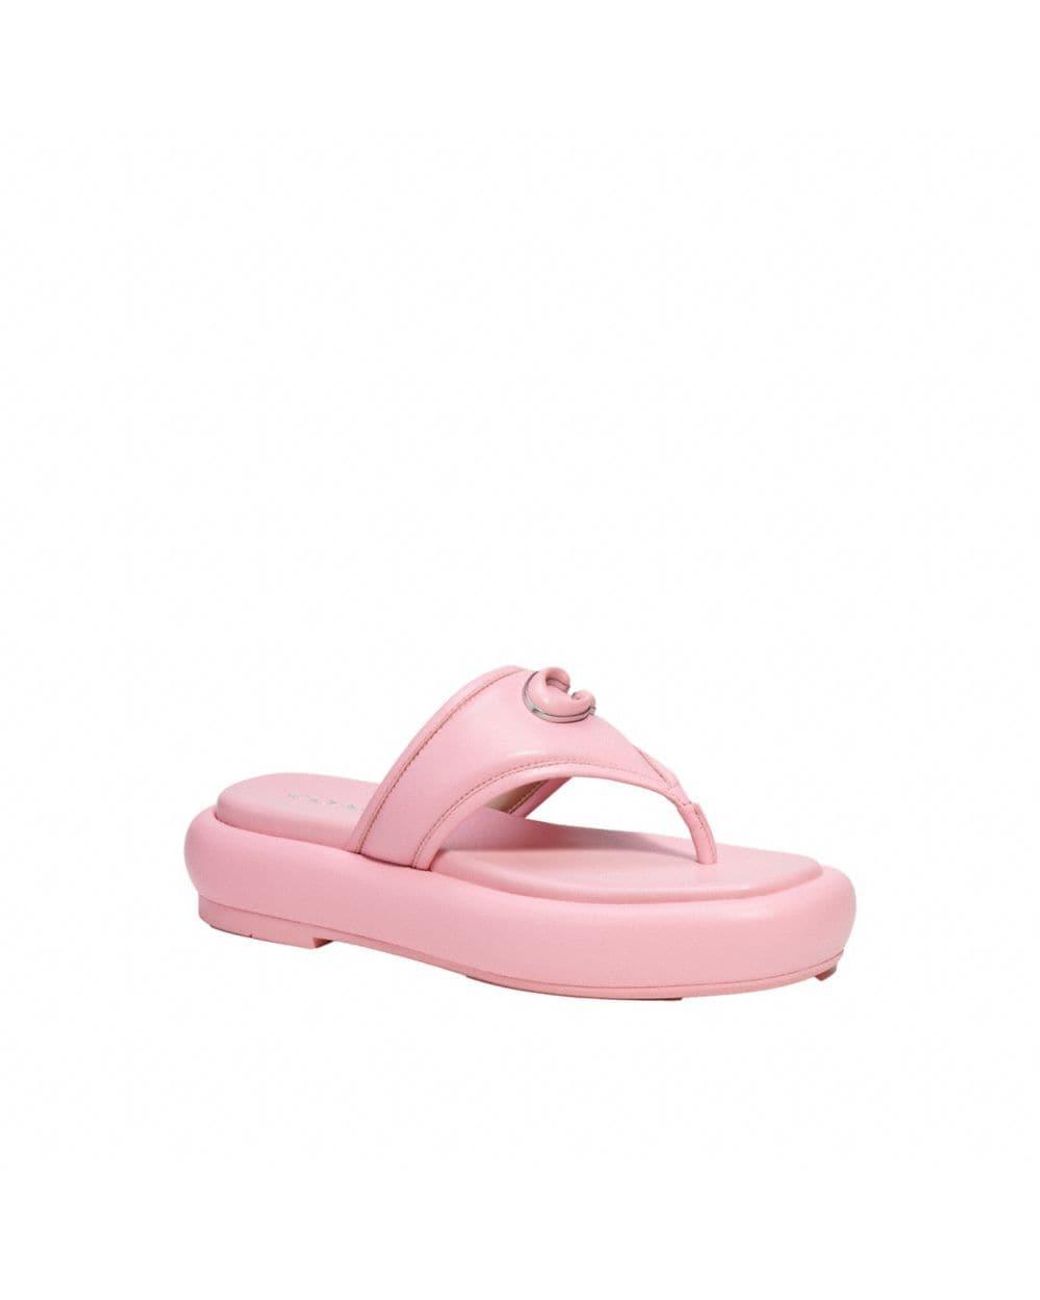 COACH Sylvie Sandal in Pink | Lyst Canada